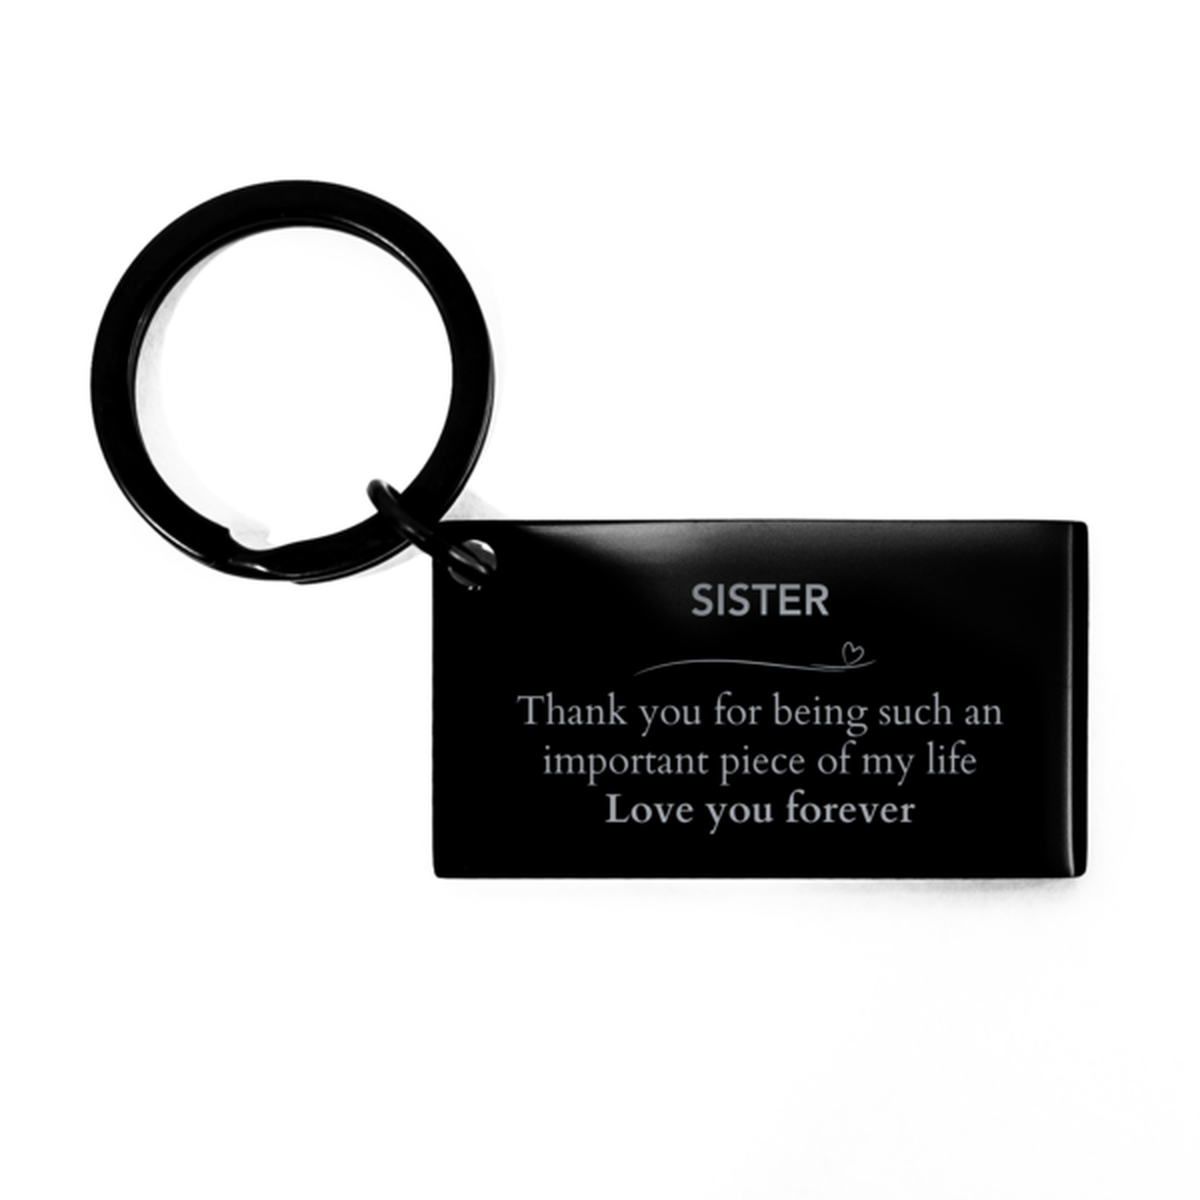 Appropriate Sister Keychain Epic Birthday Gifts for Sister Thank you for being such an important piece of my life Sister Christmas Mothers Fathers Day